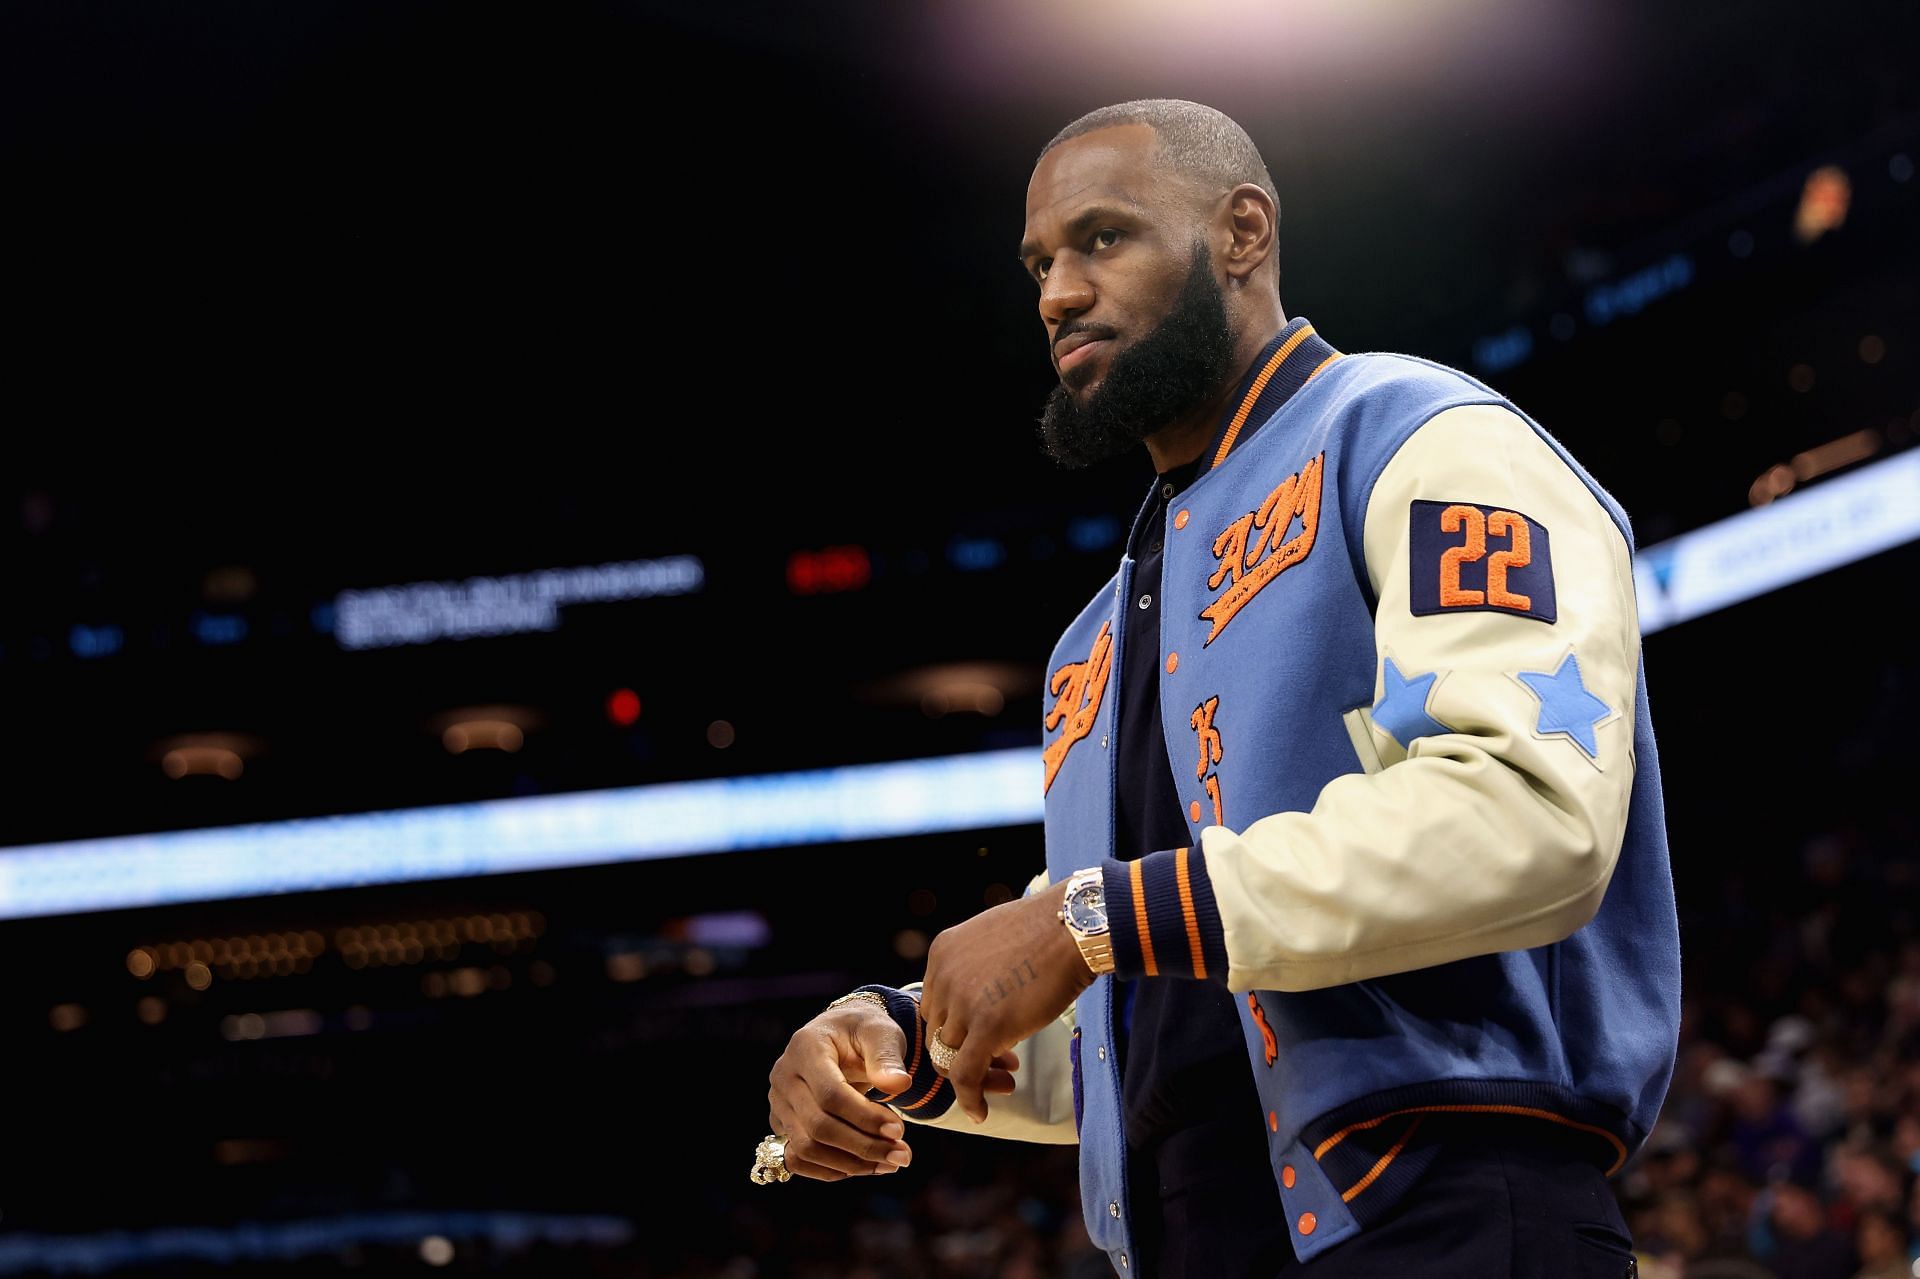 18-Year Old LeBron James Rejected $110 Million From Reebok And $70